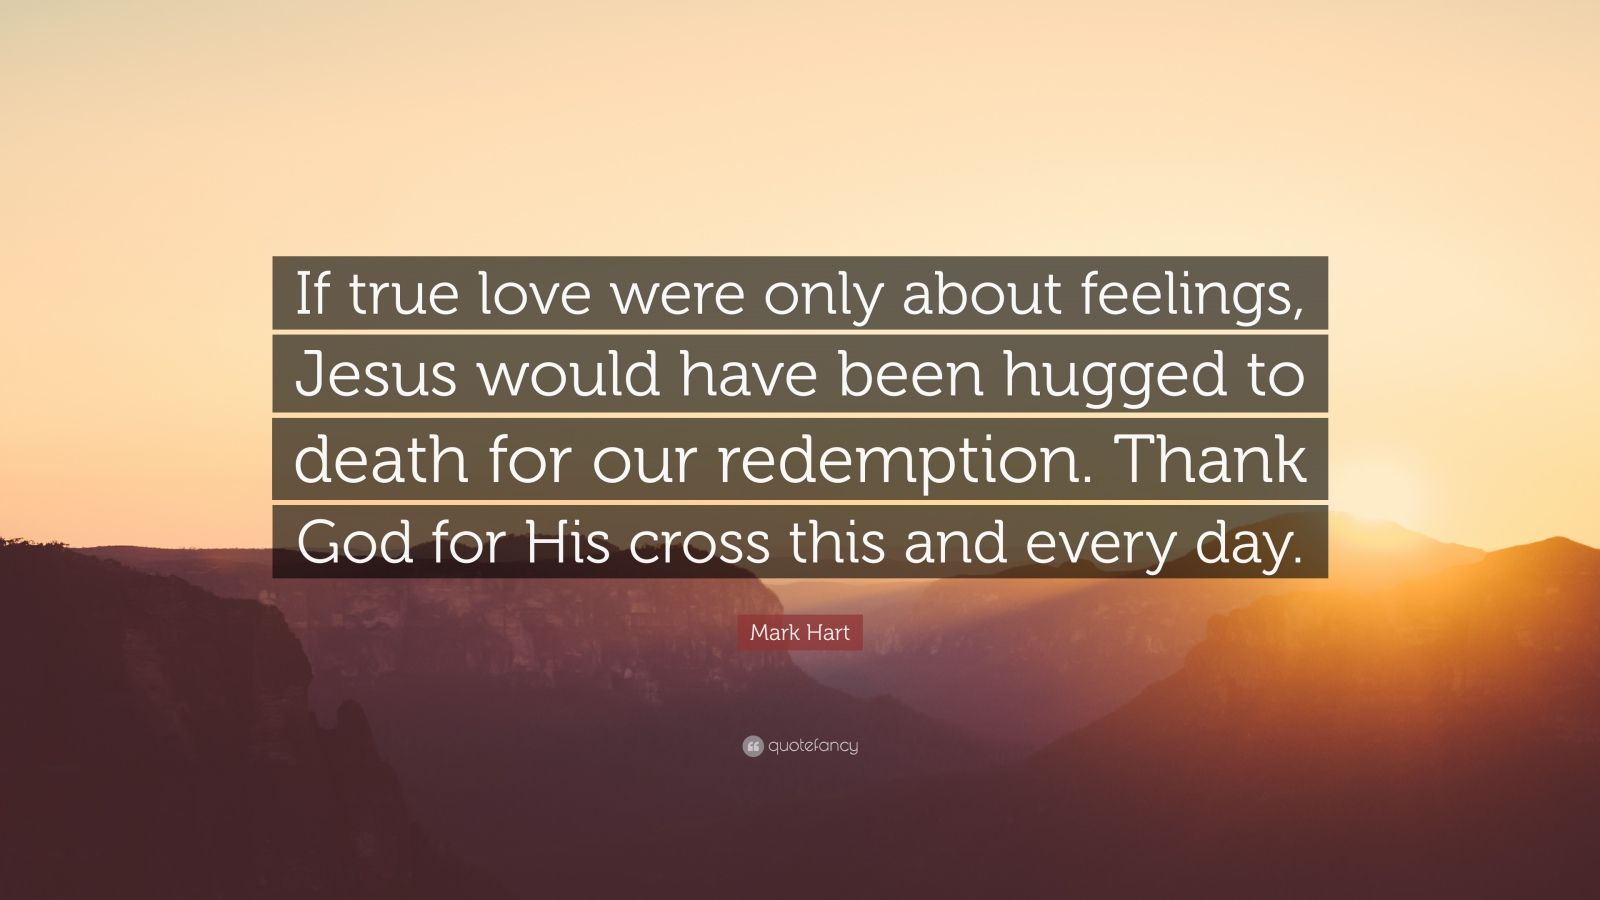 Mark Hart Quote “If true love were only about feelings Jesus would have